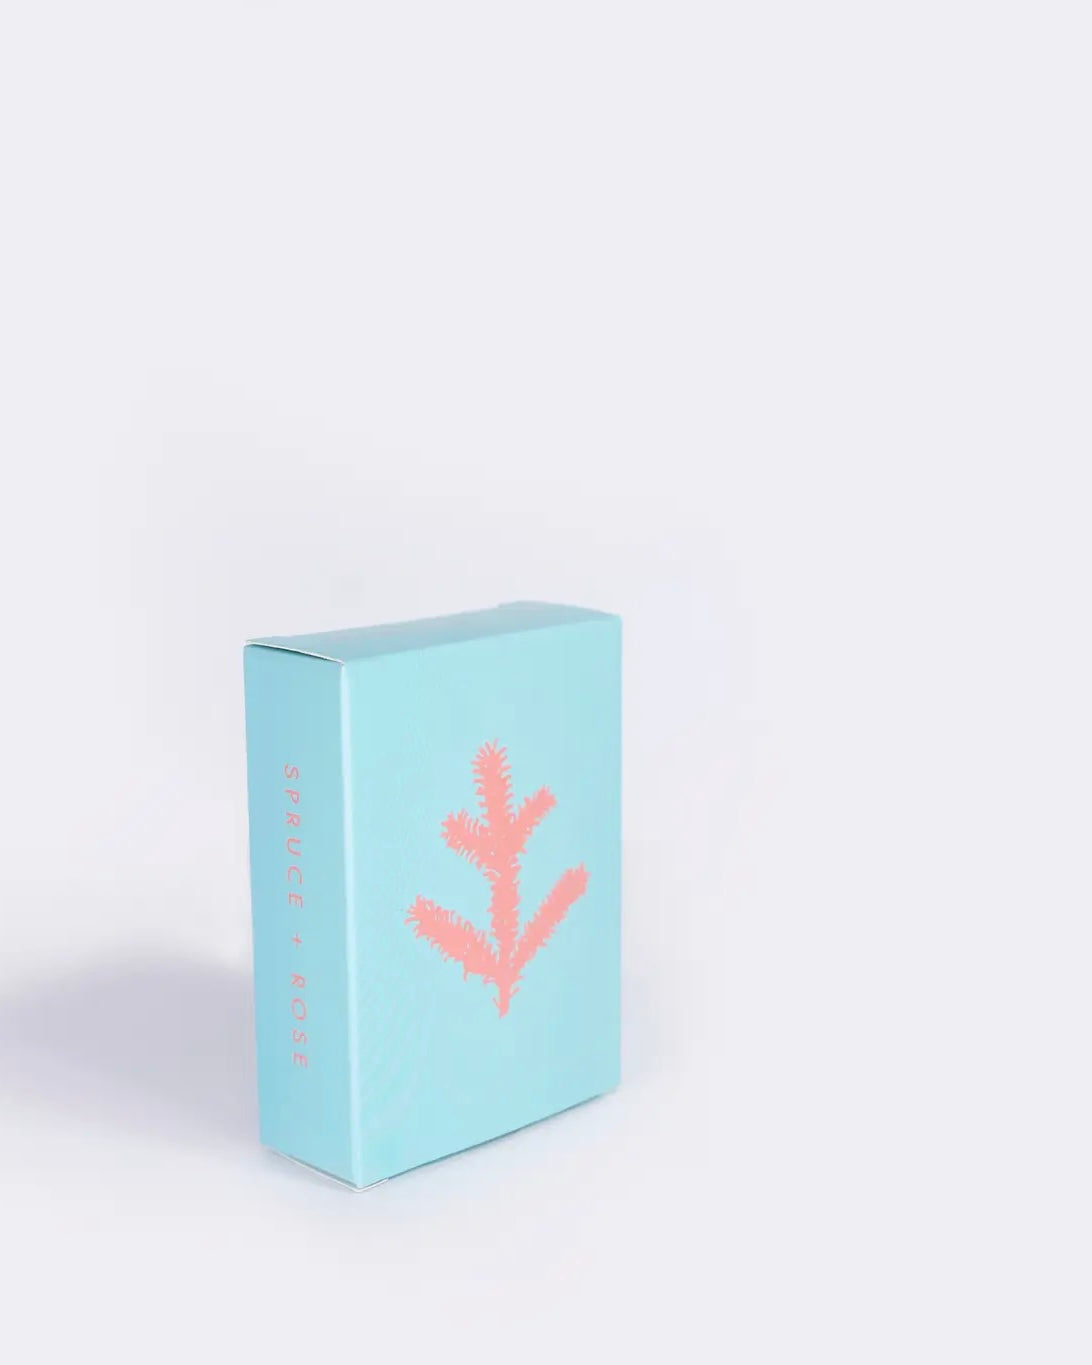 the ALTR Spruce & Rose Bar Soap in it's box against a neutral background